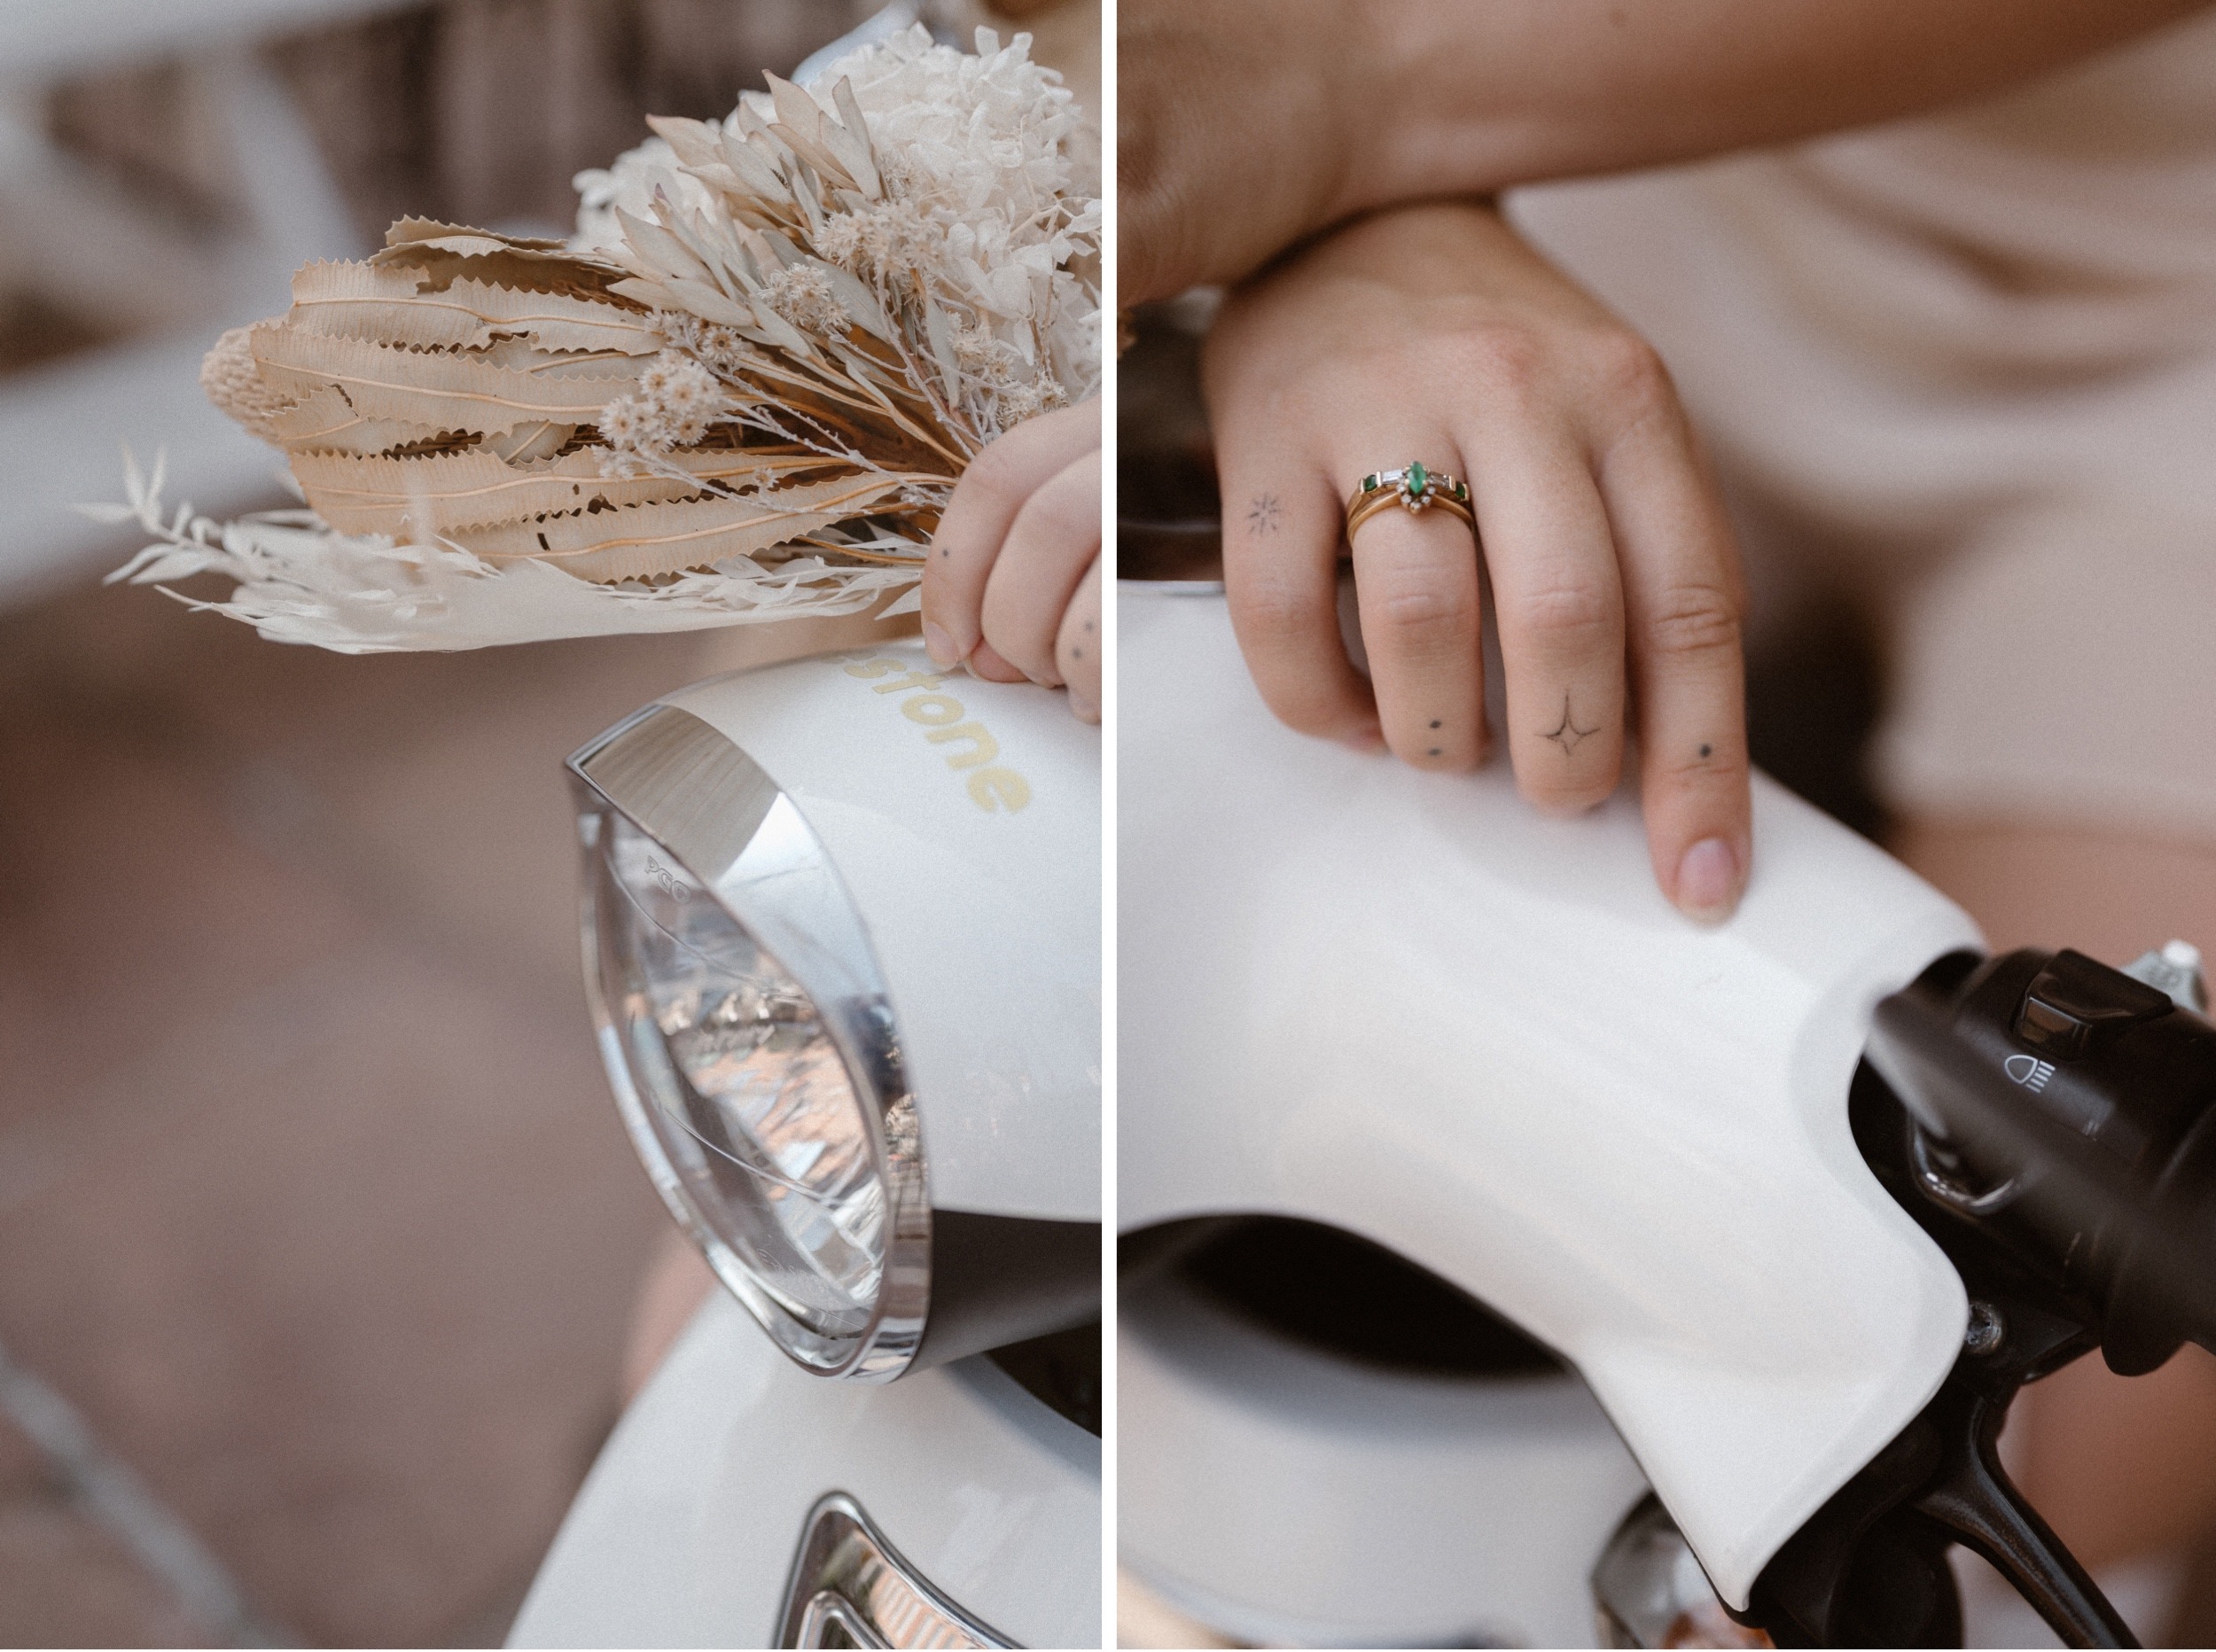 A romantic Italian-inspired downtown Denver elopement, complete with vintage outfits and an Italian scooter. Set in Larimer Square in downtown Denver.